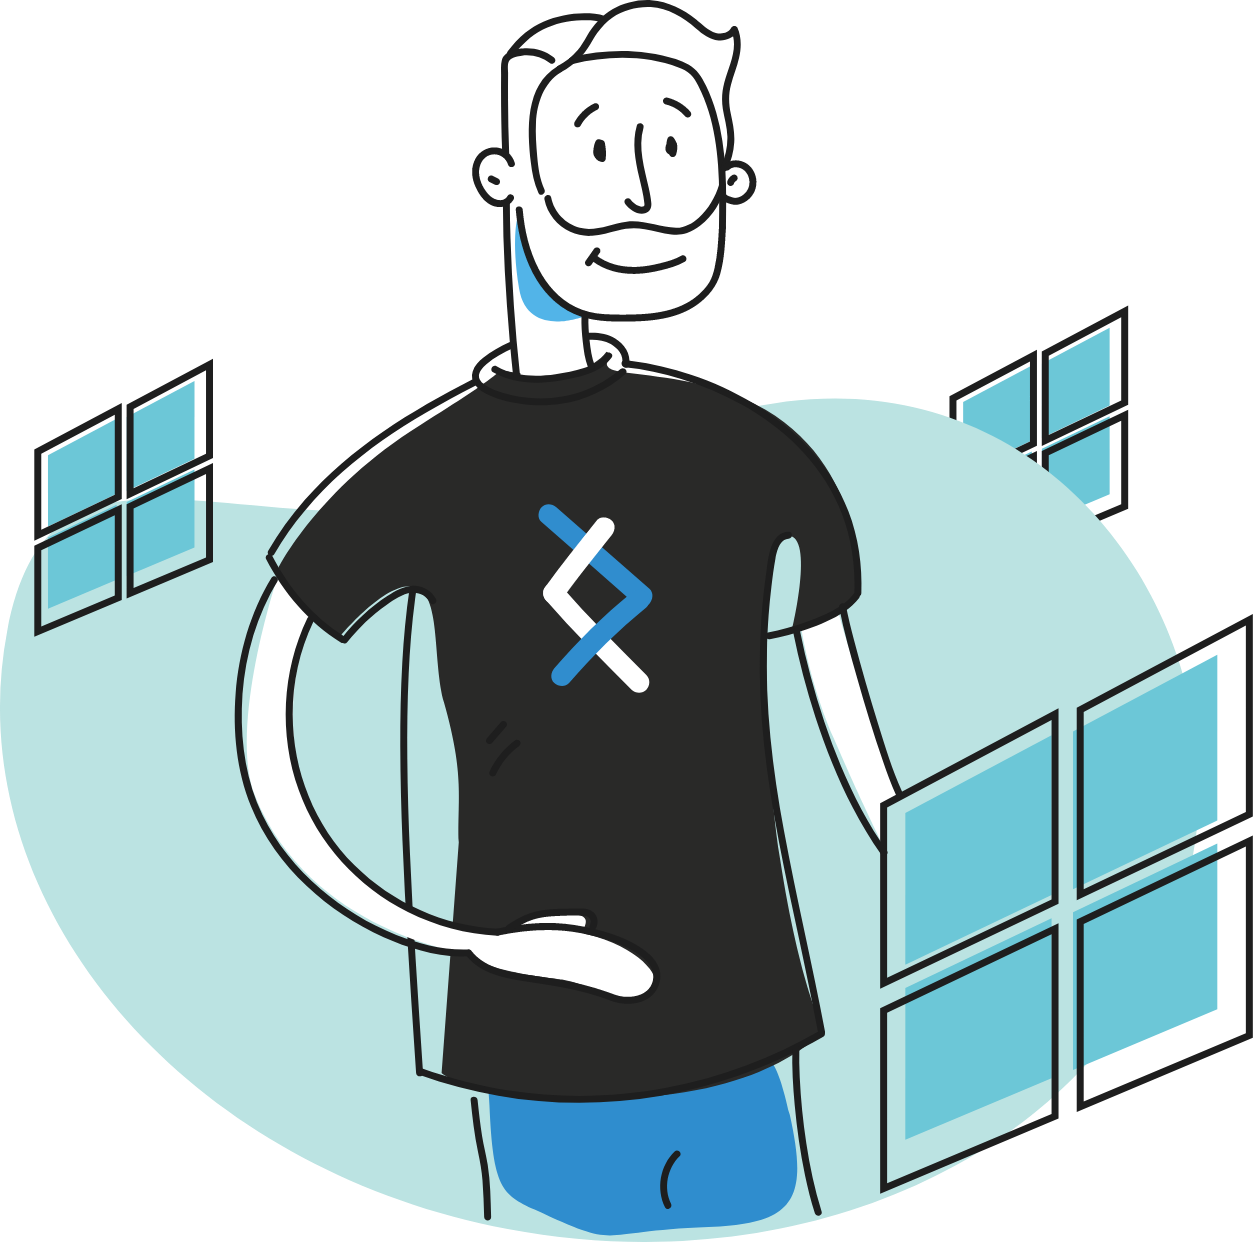 DNX character surrounded by Windows